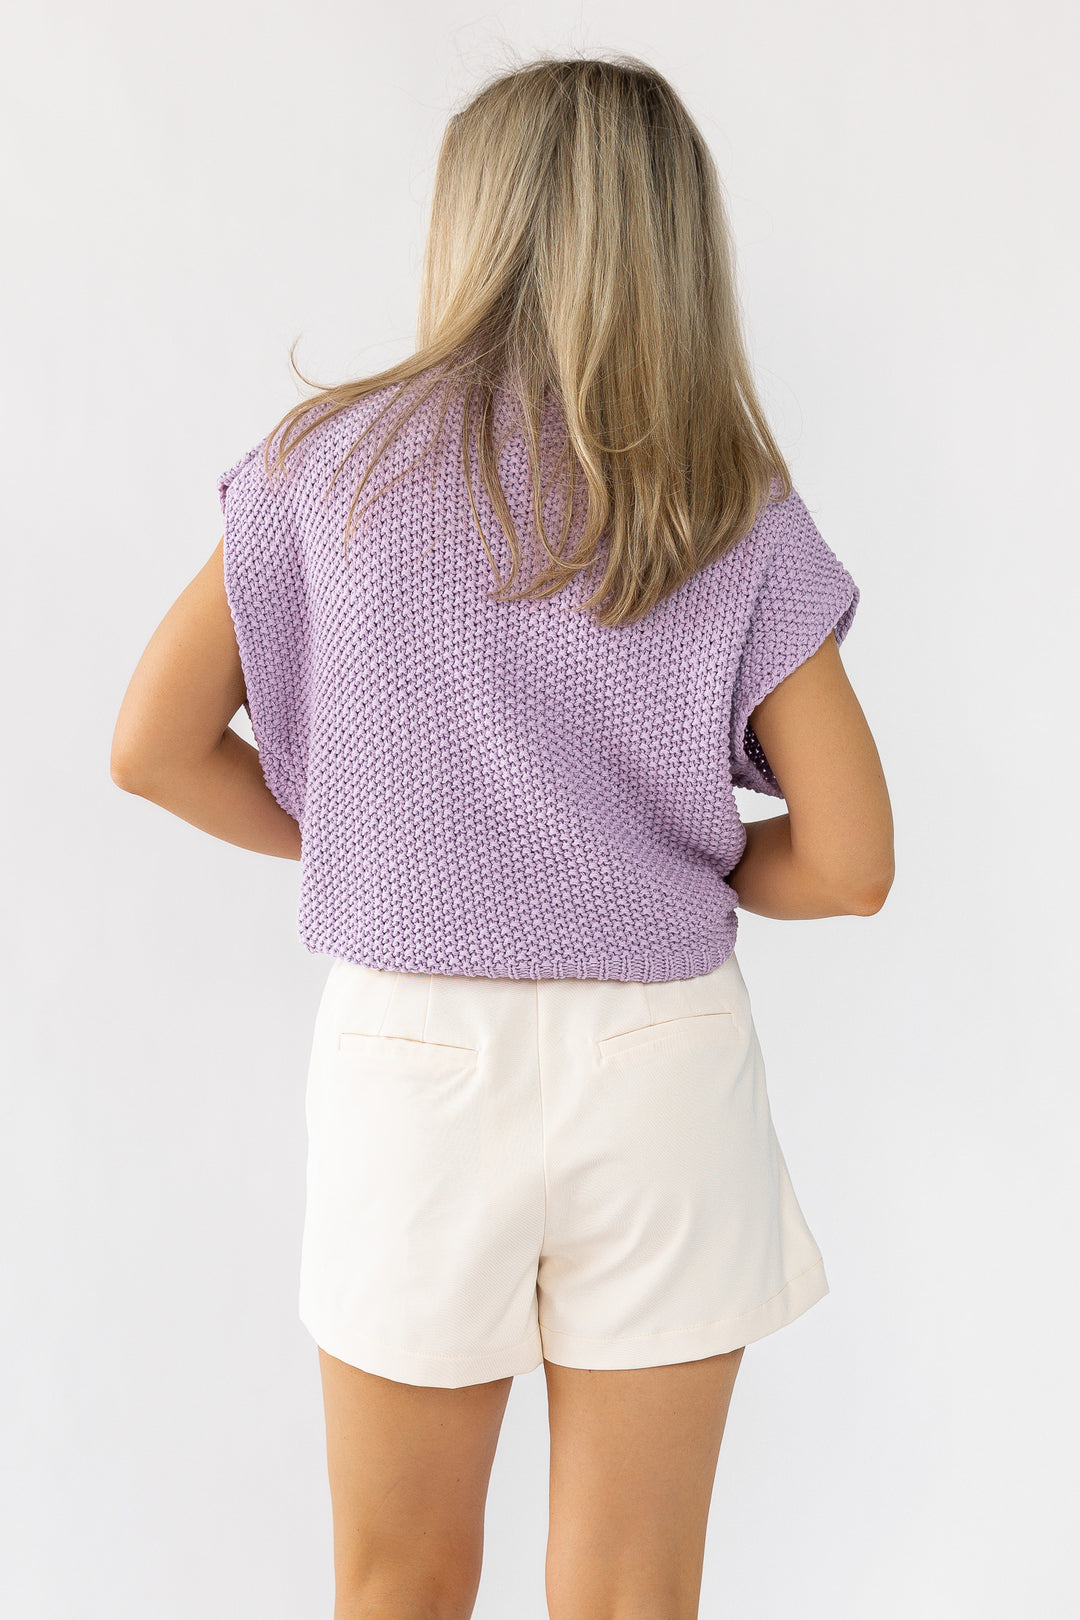 Falling For You Lilac Sweater - Final Sale